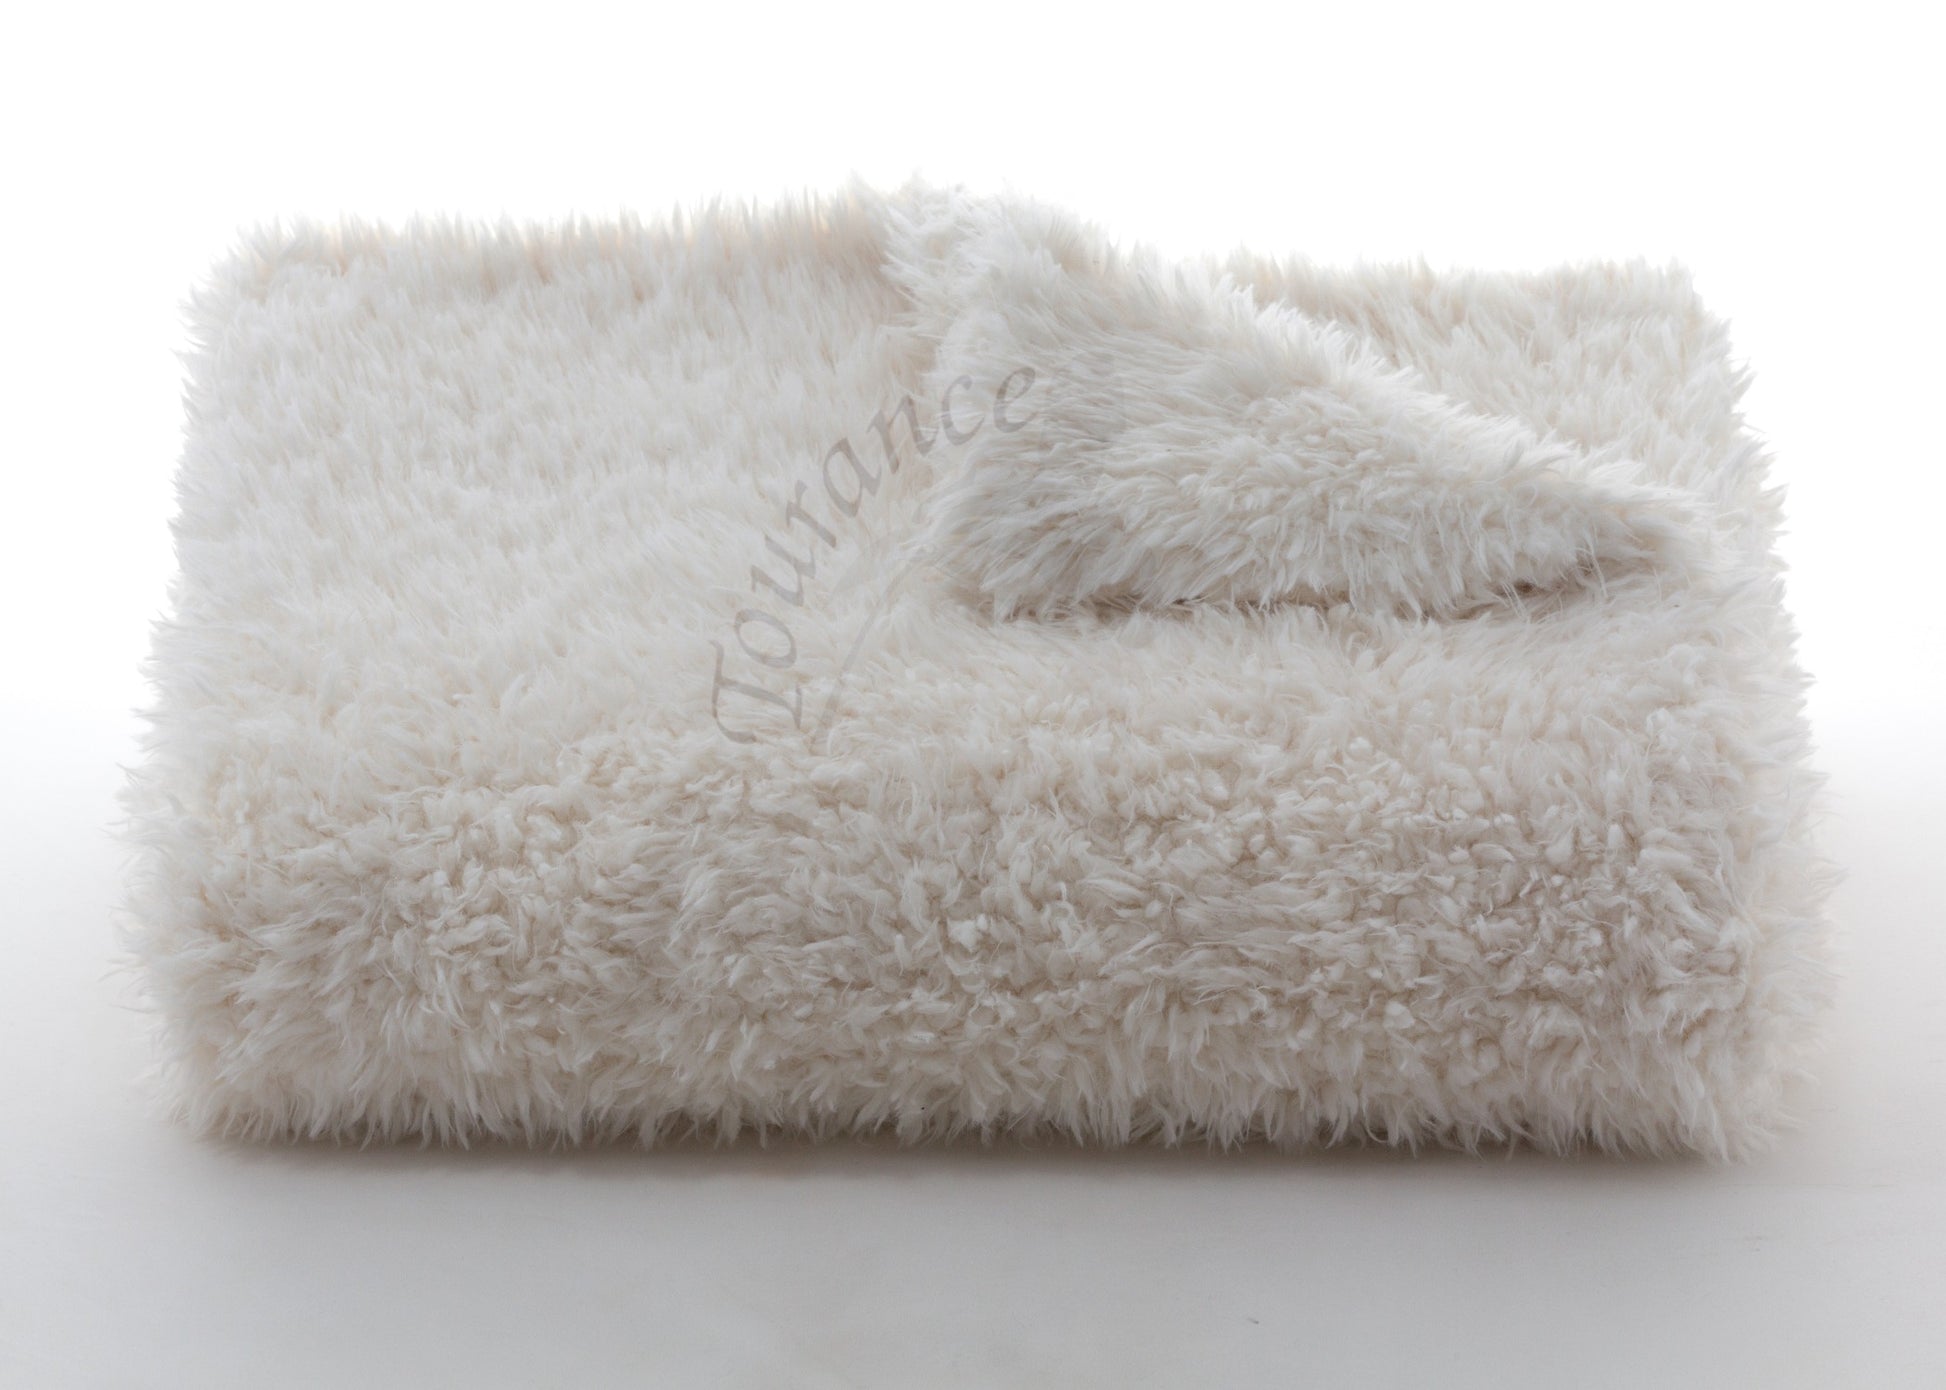 Lamb’s Wool Throw in Ivory with watermark